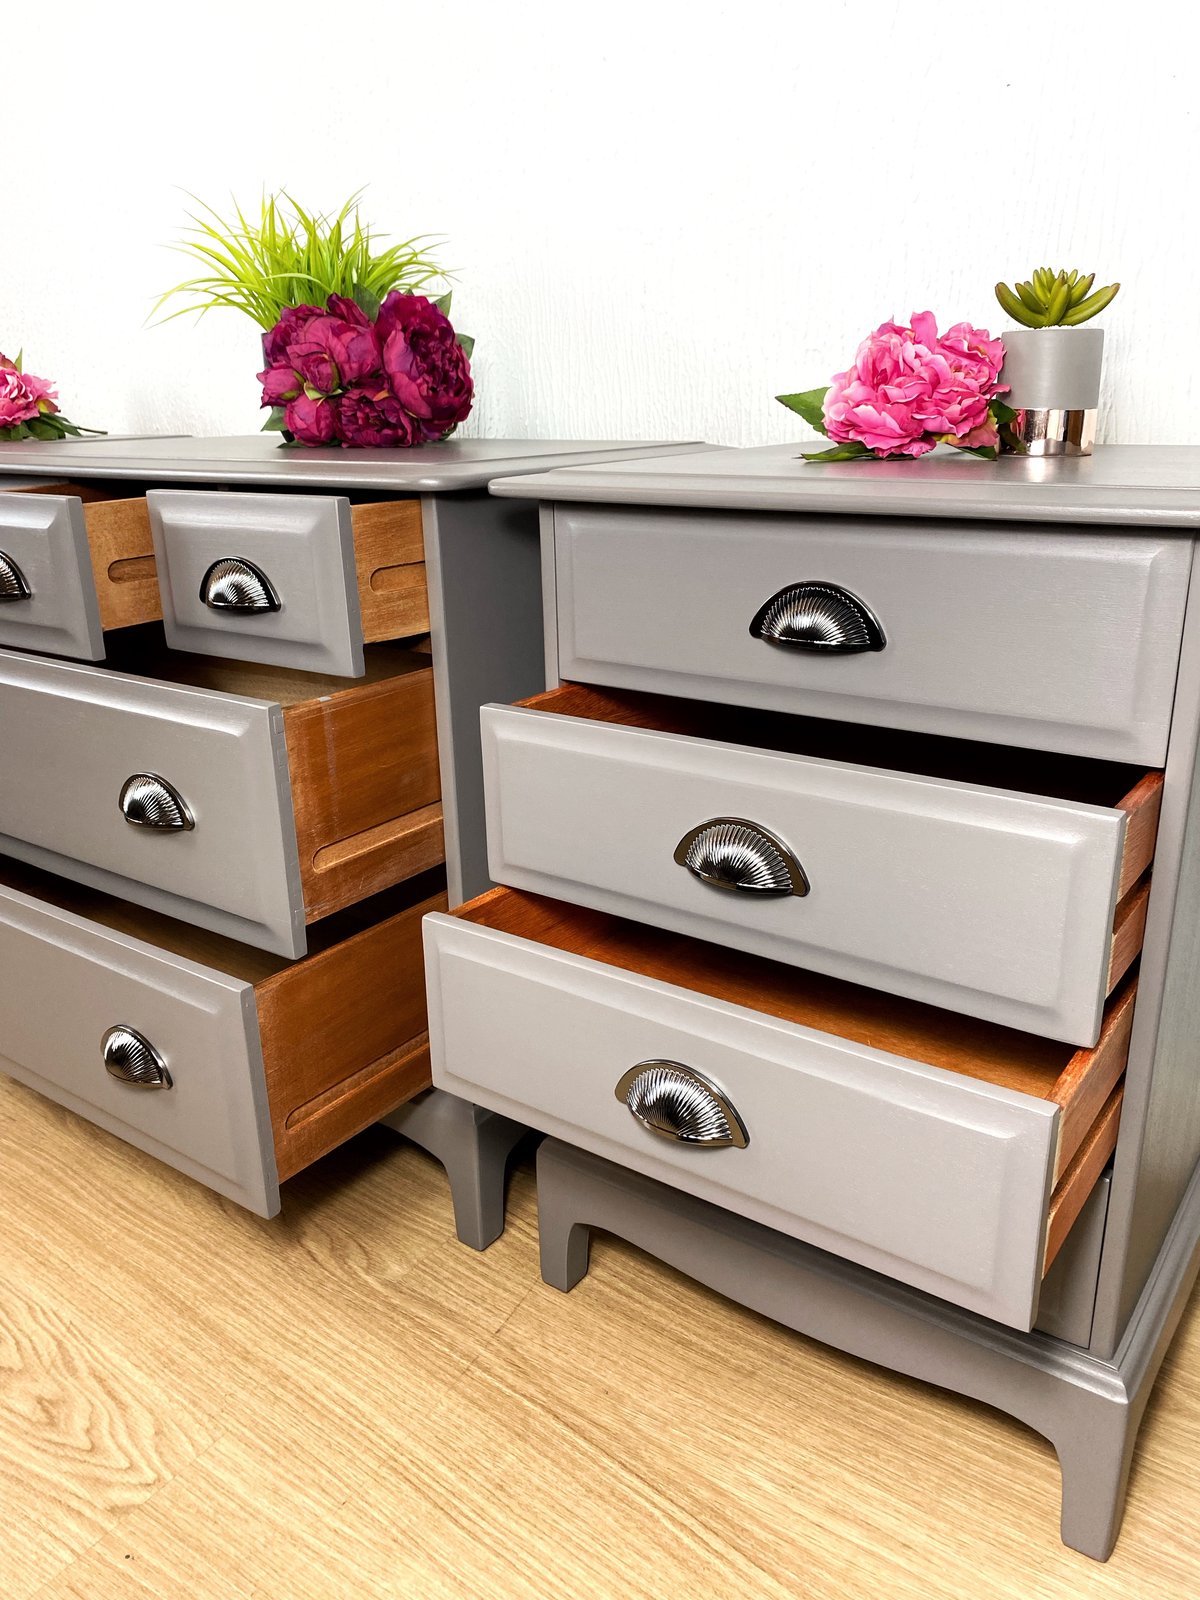 Stag Minstrel Bedroom Furniture Set, Grey Chest Of Drawers and Bedside Tables.